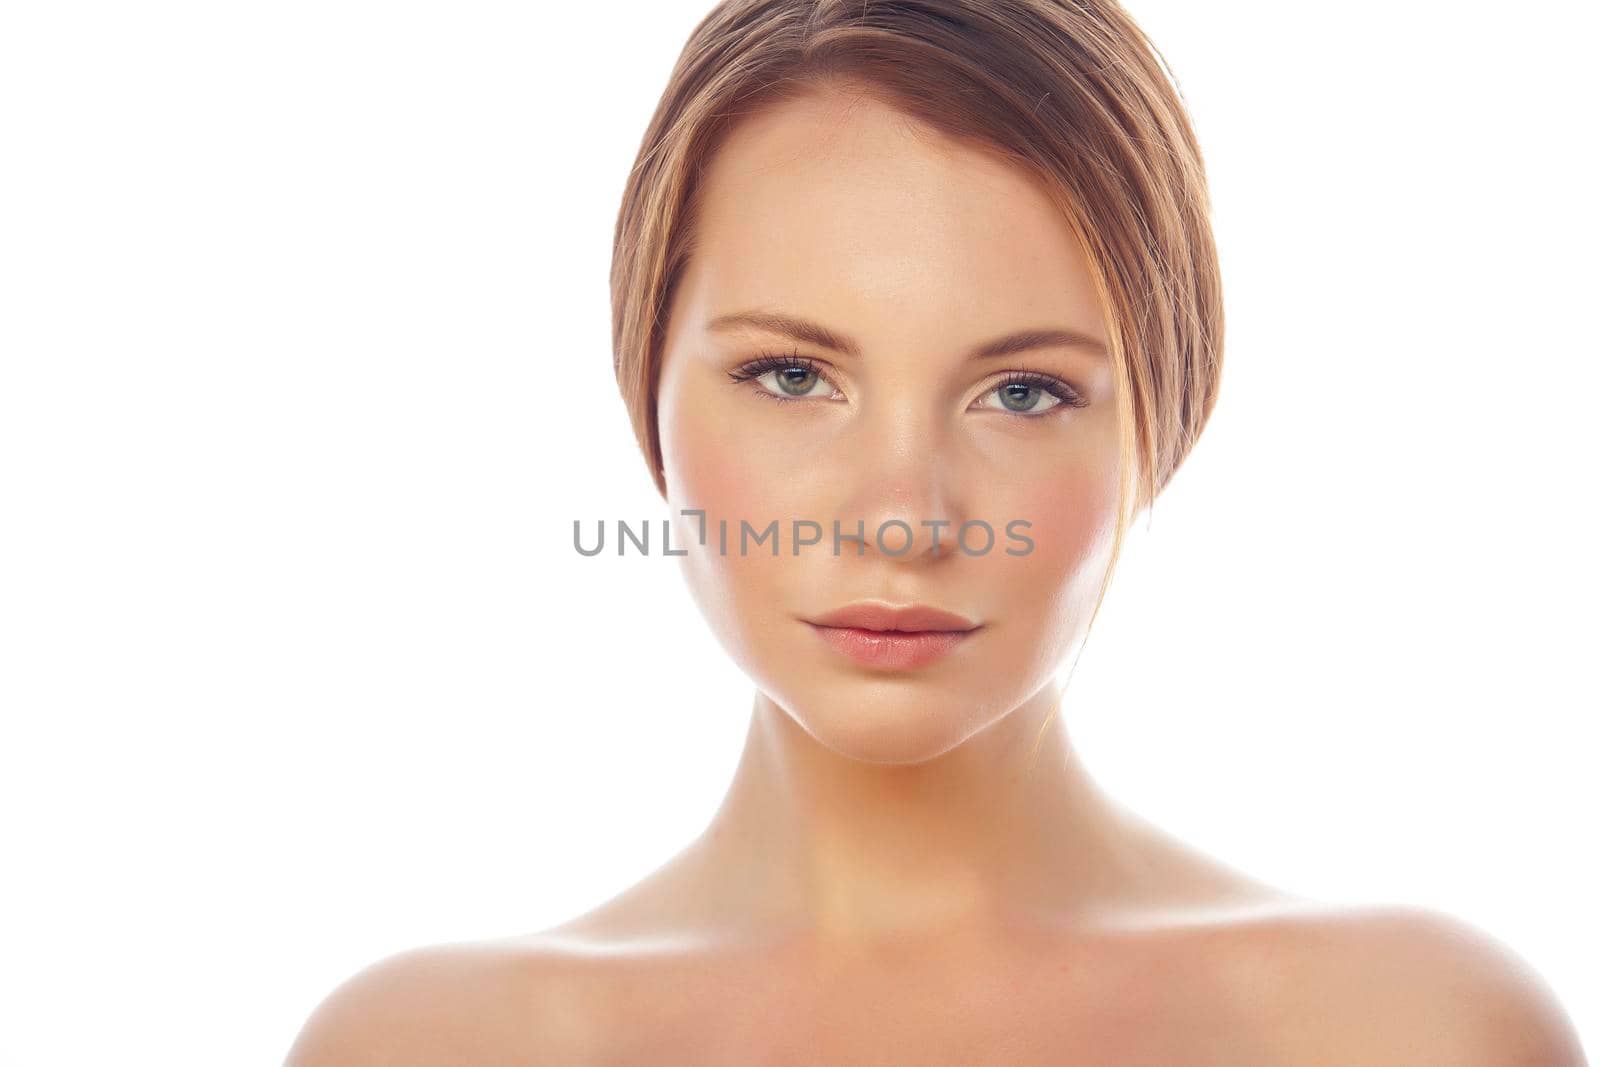 spa picture attractive lady young red hair isolated on white close up